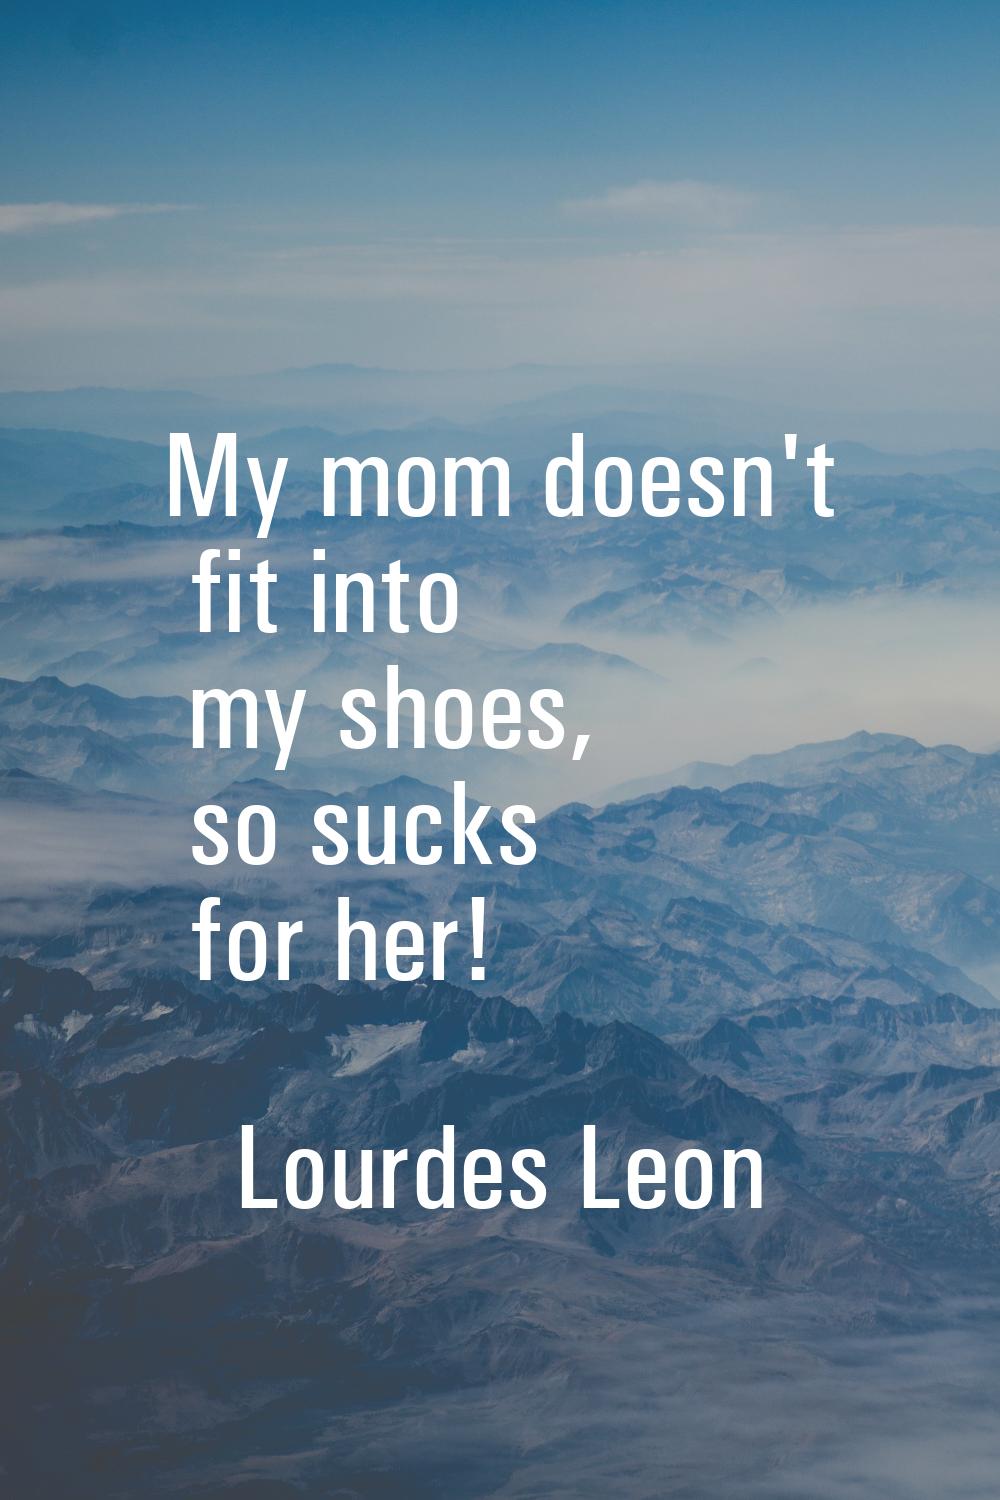 My mom doesn't fit into my shoes, so sucks for her!